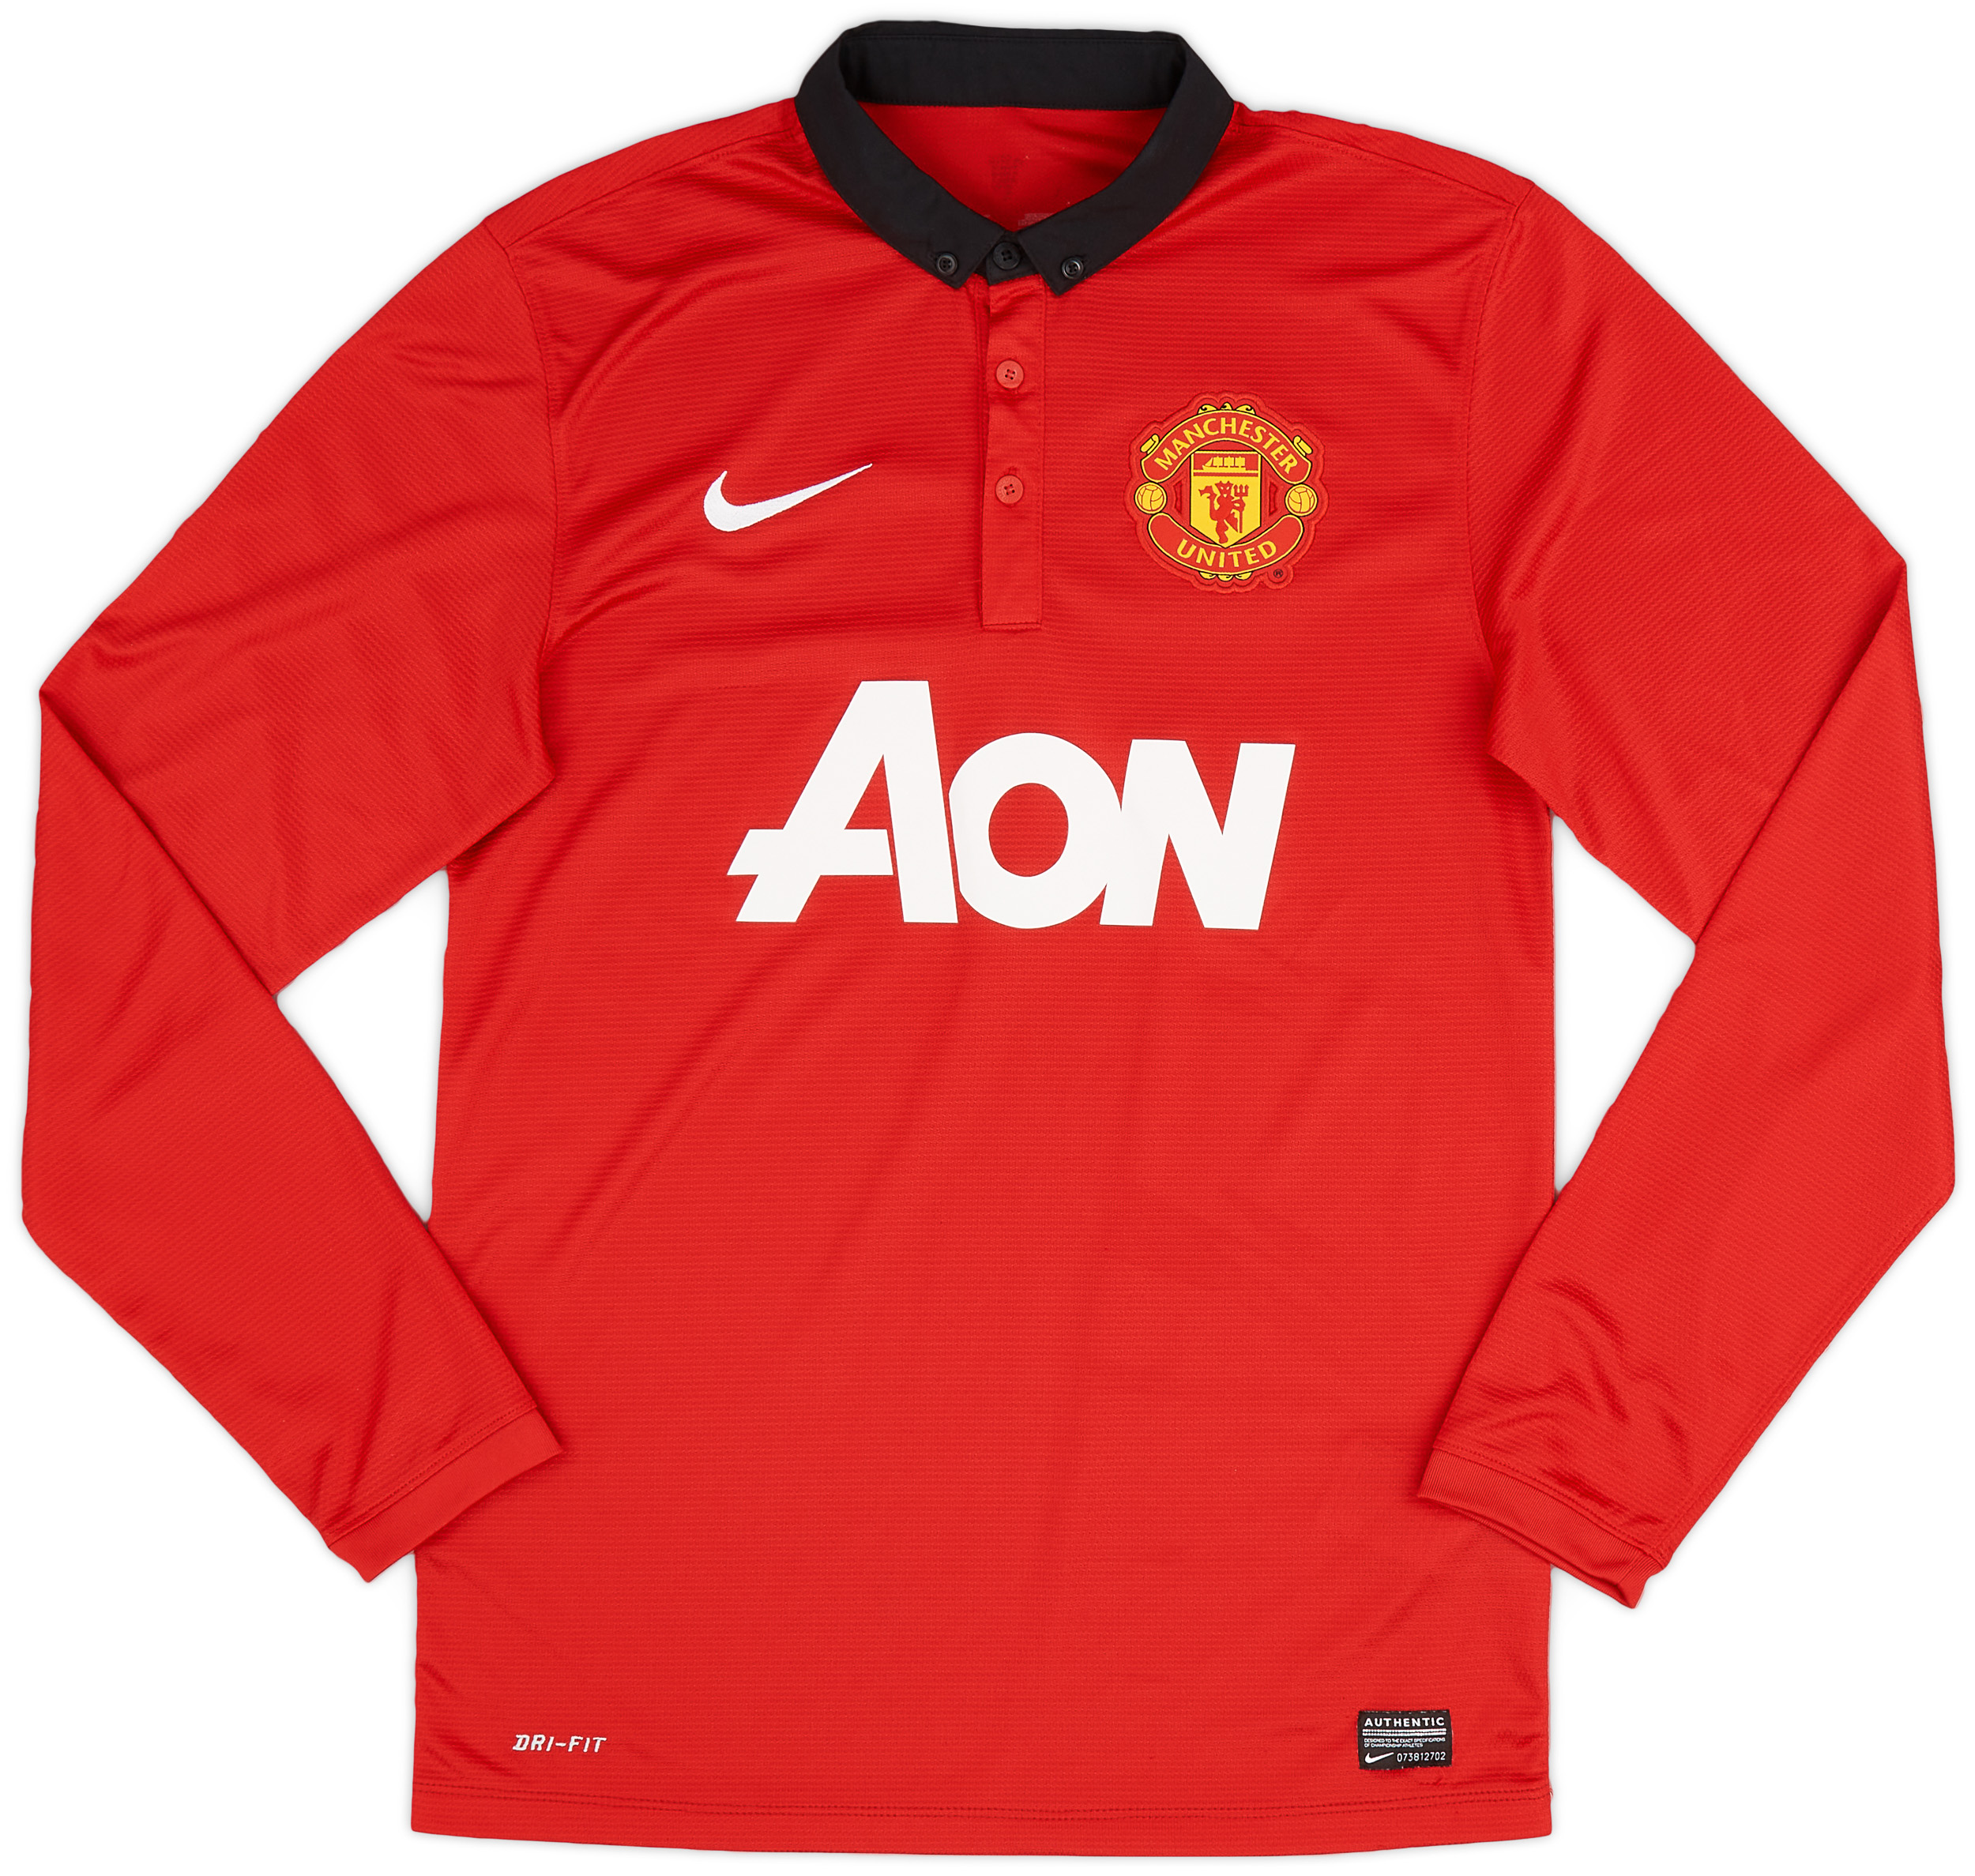 2013-14 Manchester United Home Shirt - 9/10 - ()